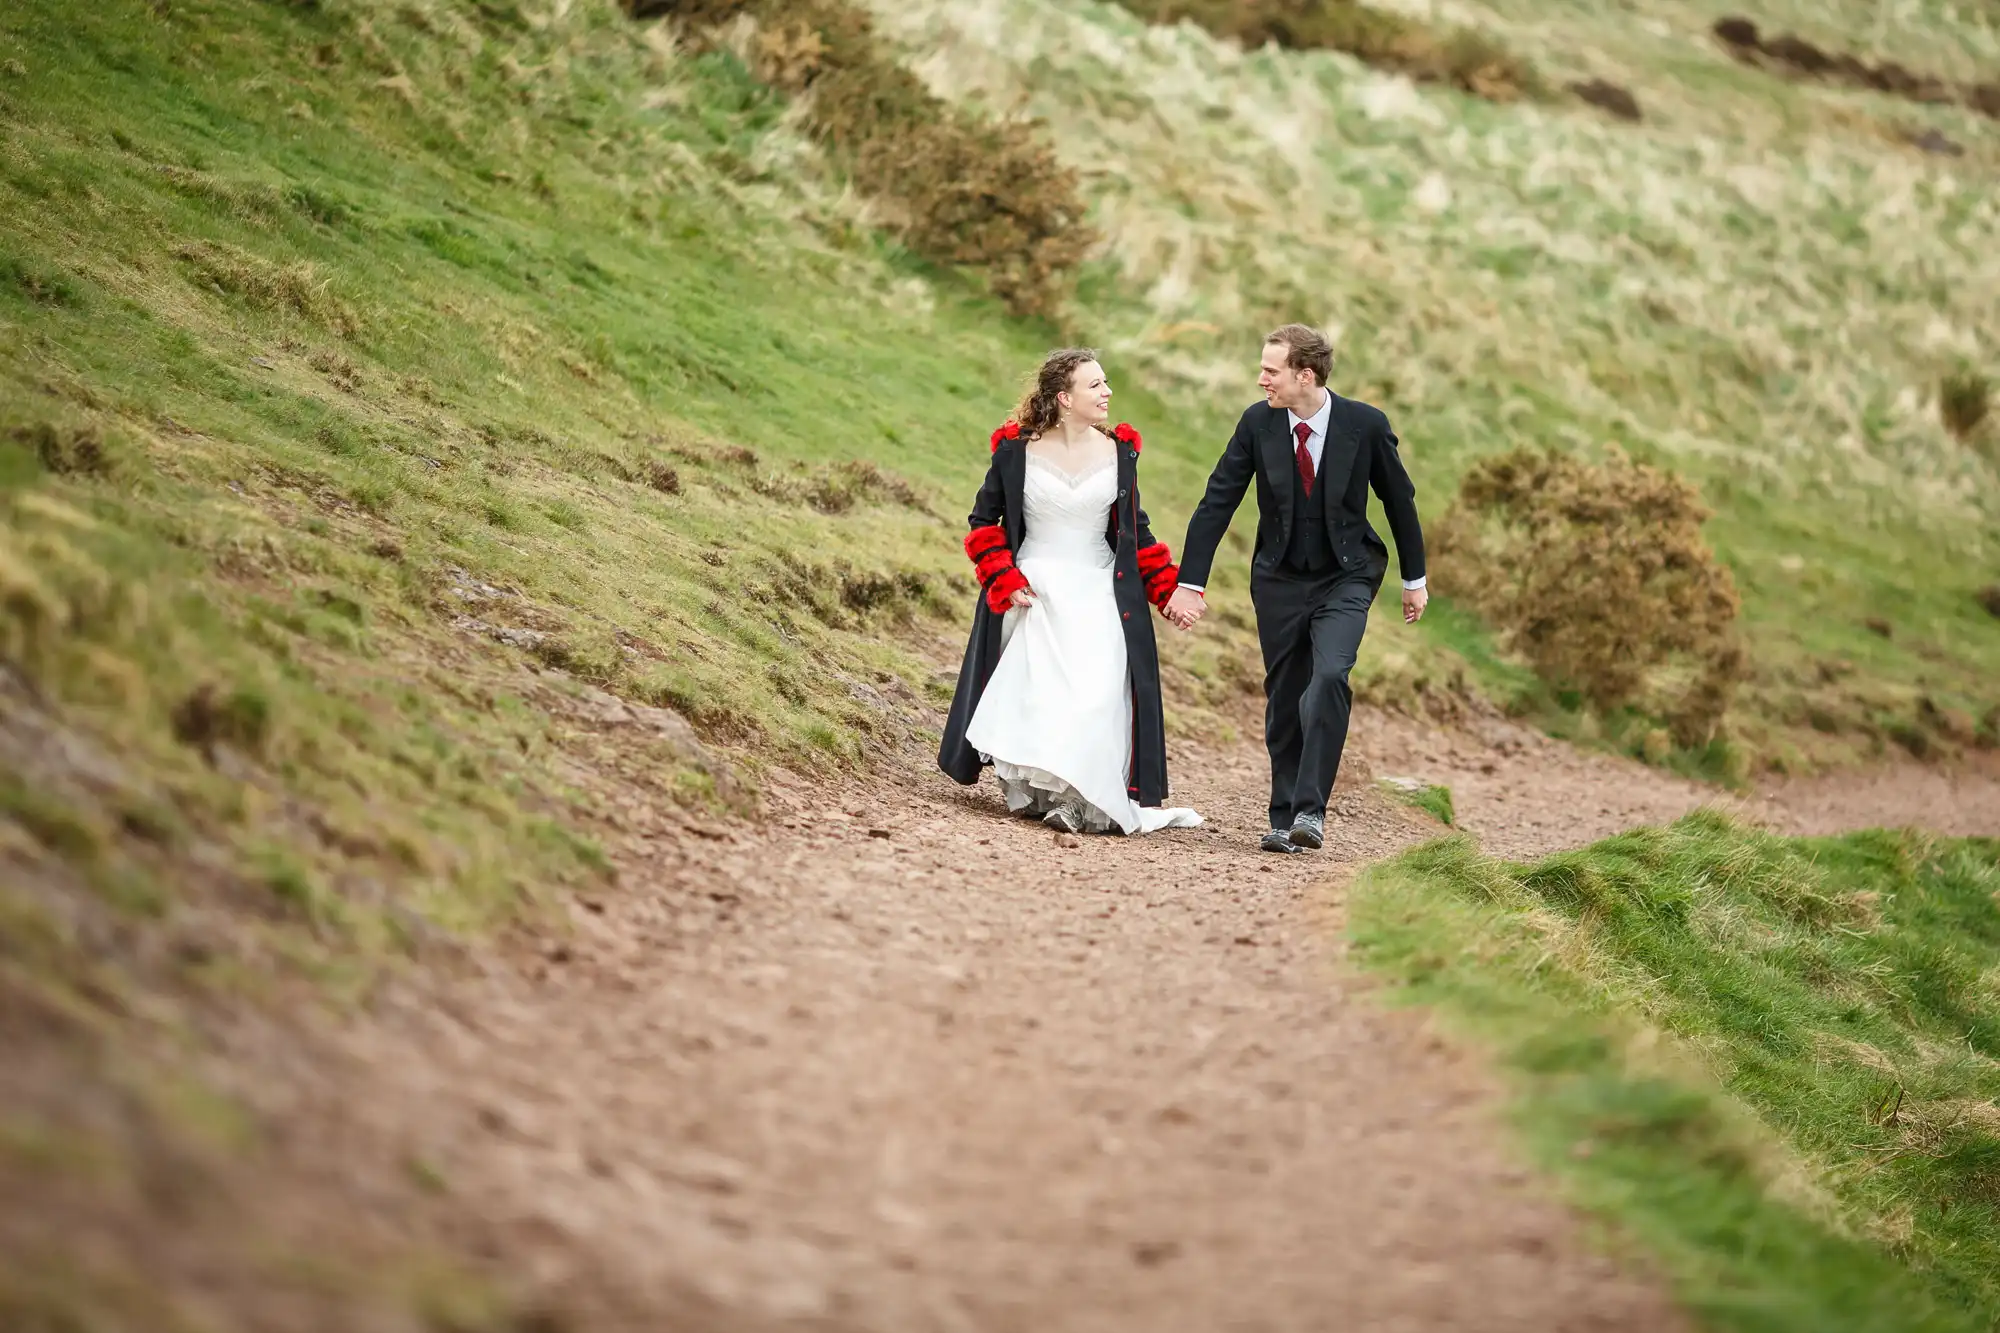 A bride in a white dress and a groom in a black suit walking together on a rural path, with grassy hills around them.